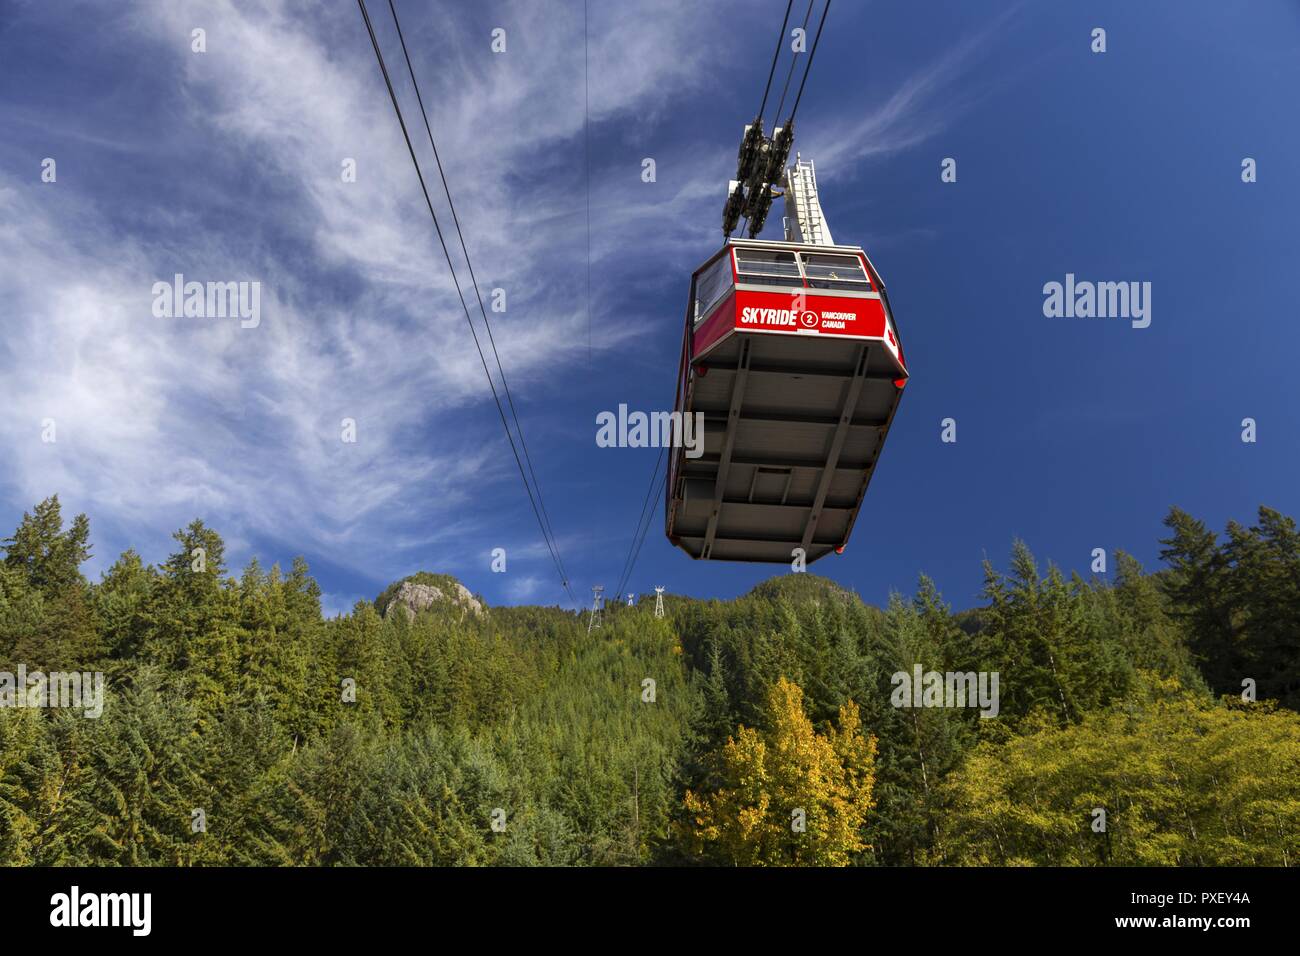 View Under World Famous Grouse Mountain Skyride Tramway Gondola Cabin in North Shore Mountains, Vancouver BC Canada Stock Photo